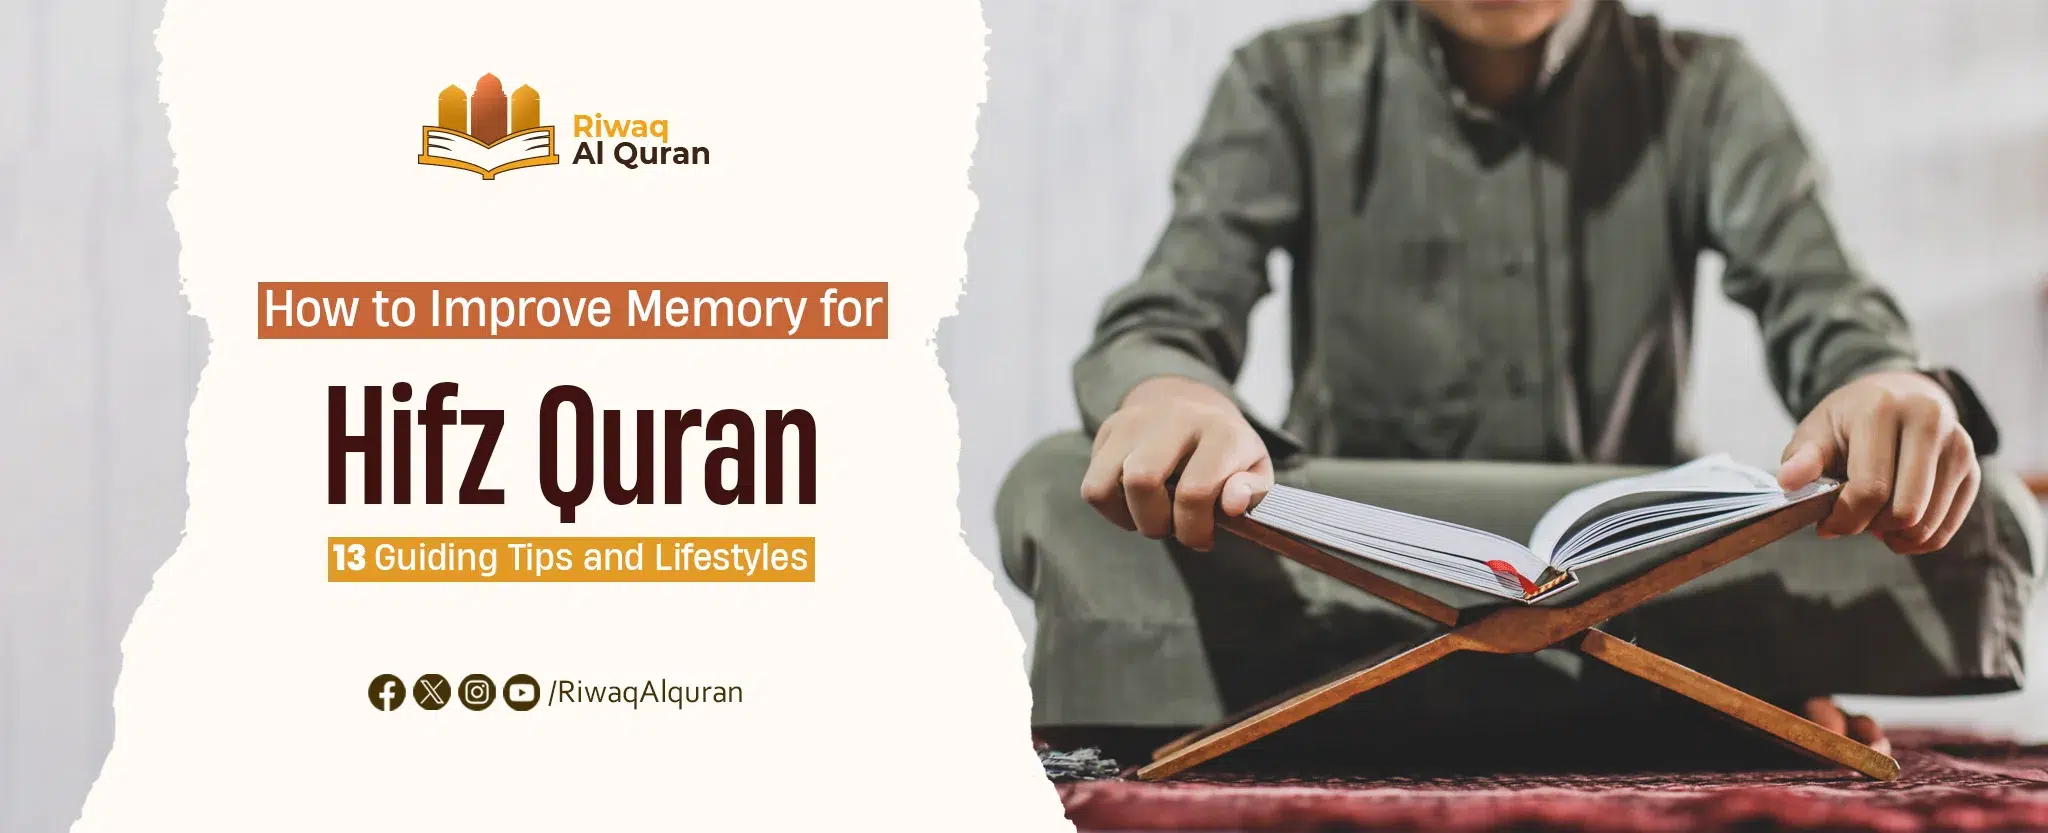 How to Improve Memory for Hifz Quran: 13 Guiding Tips and Lifestyles